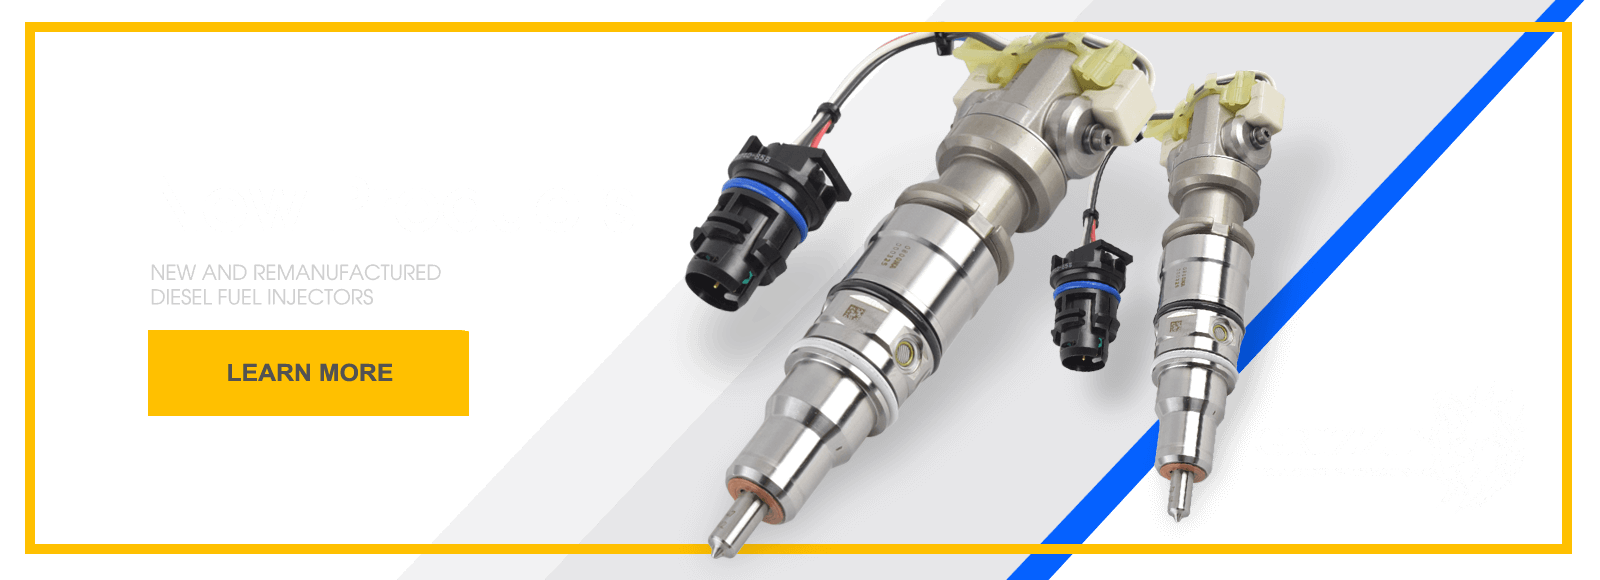 Grizzly Diesel Fuel Injectors